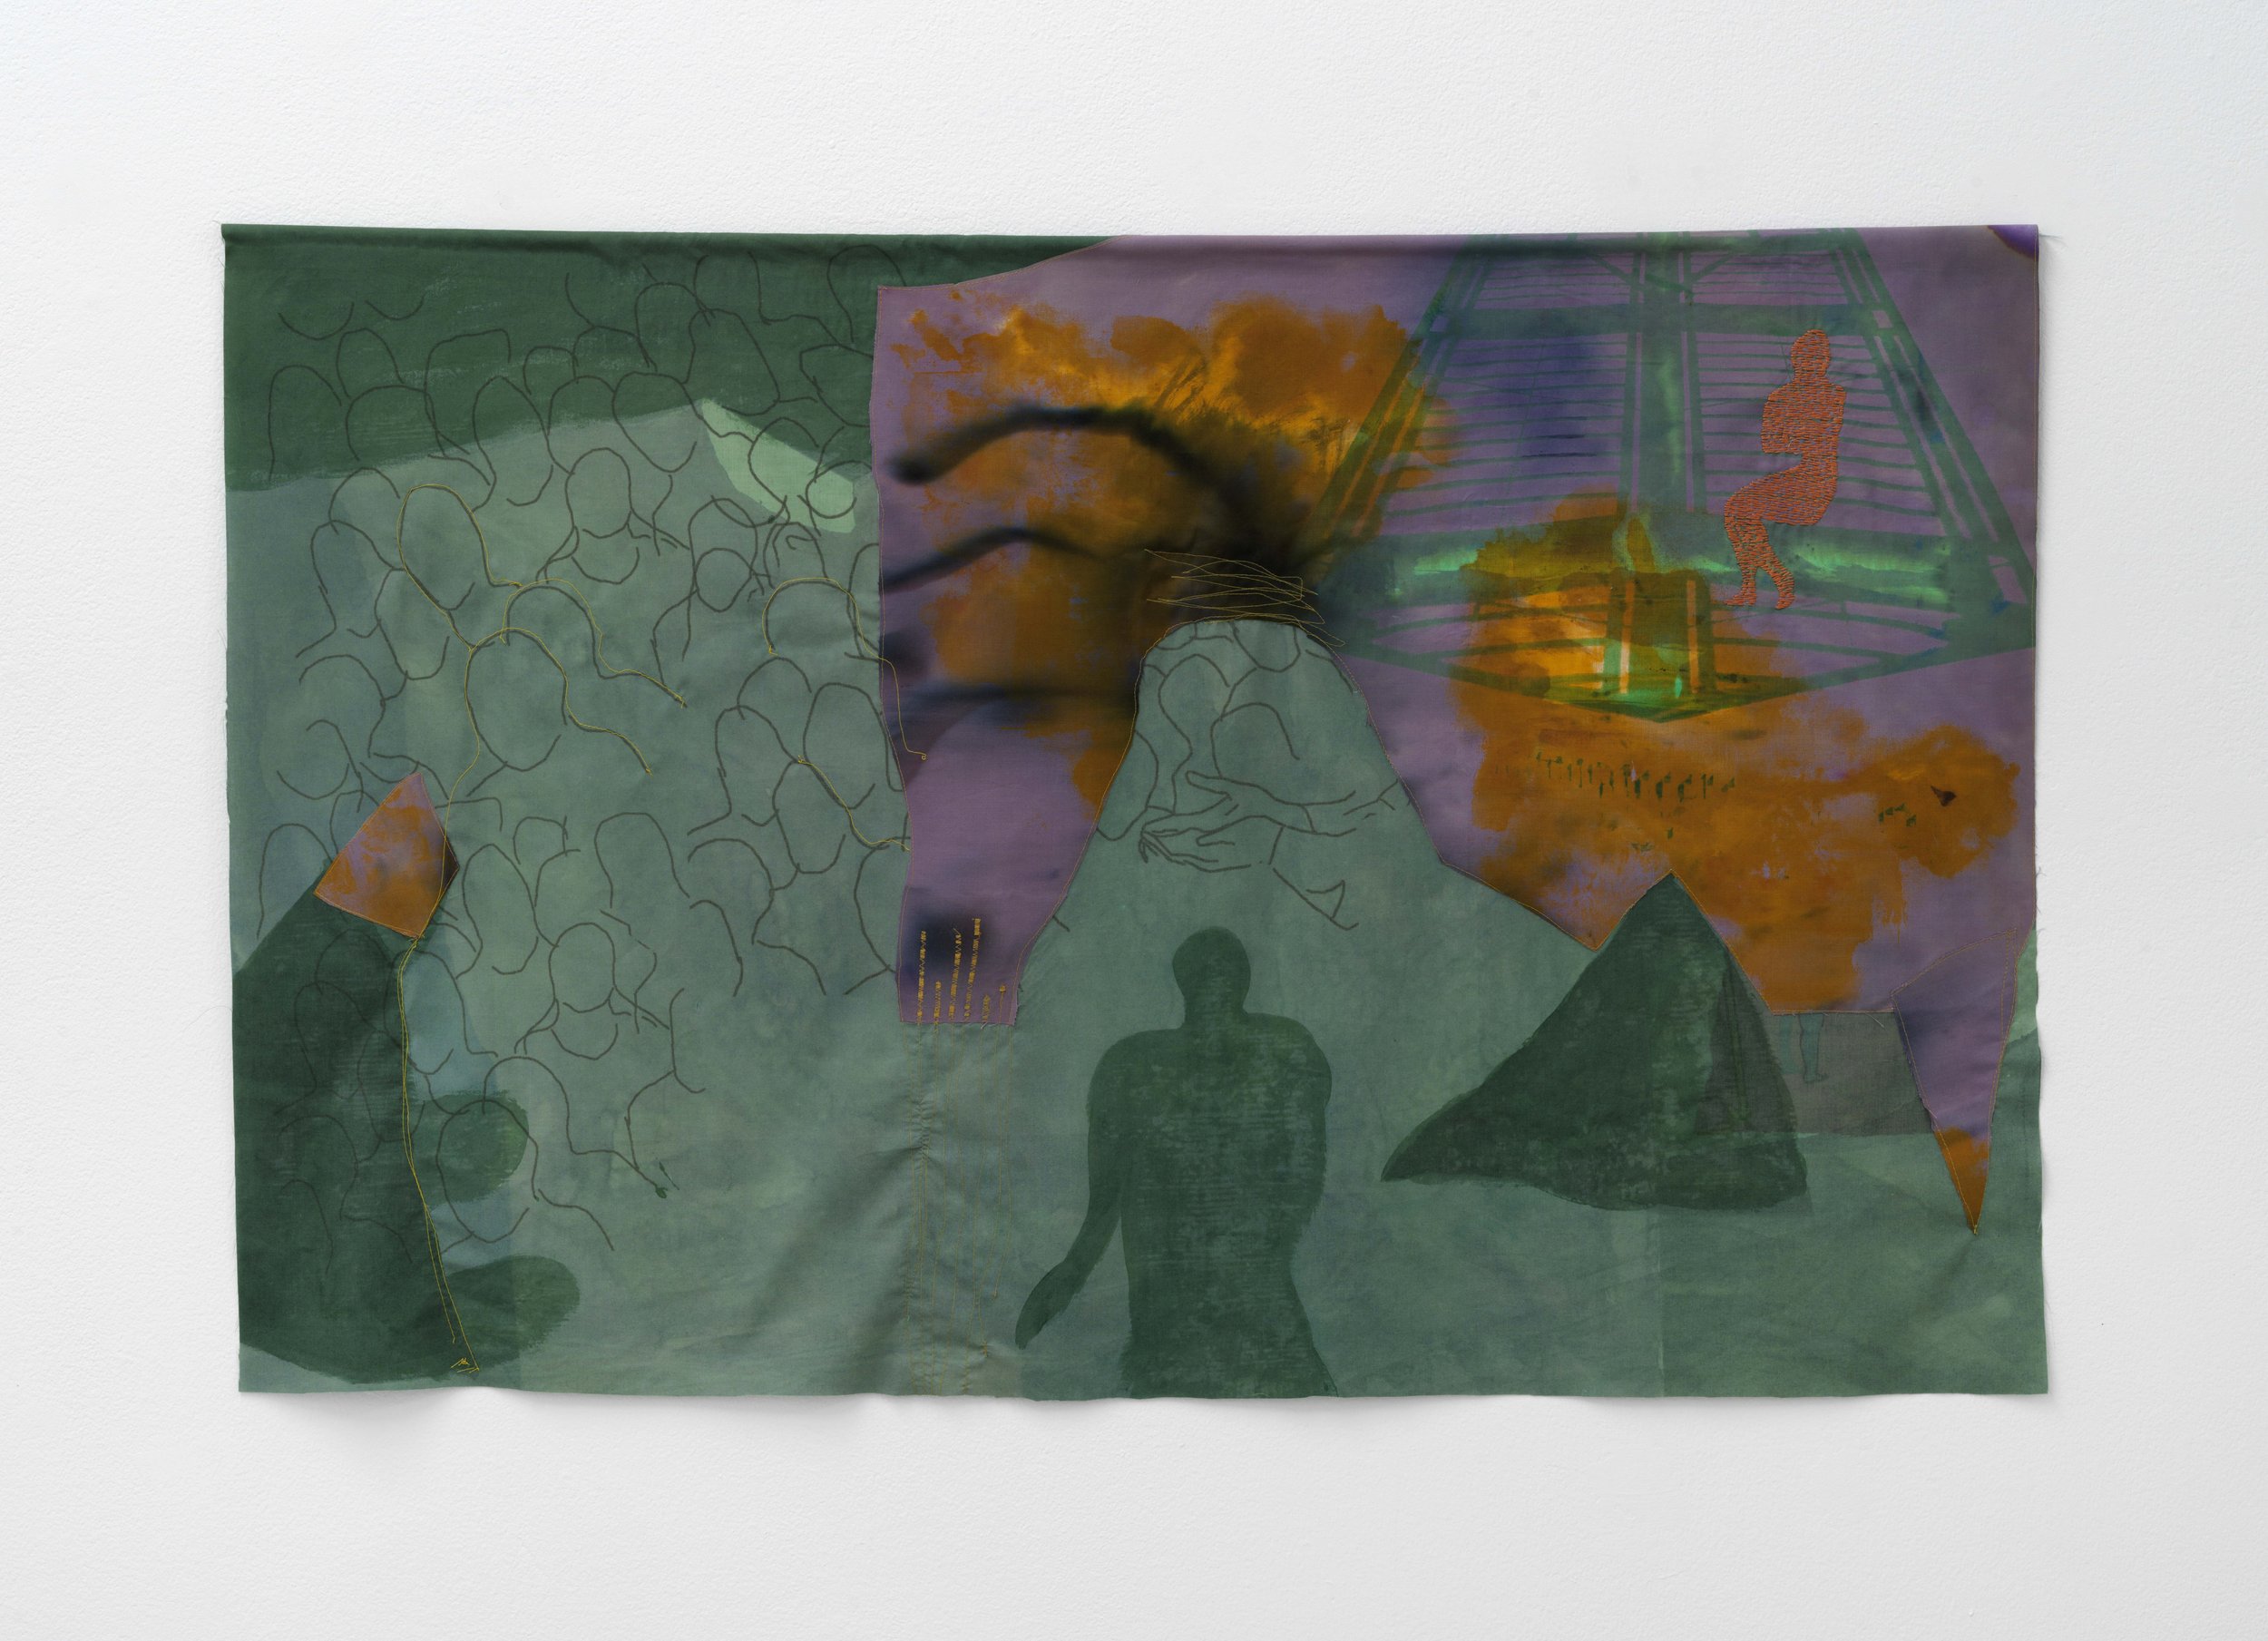  Sunrise Green, 2023, Hand stitched embroidery, Hand dyed Fabric, Appliquéd cotton fabric, sublimation printing, screen printing, 43x27 inches    